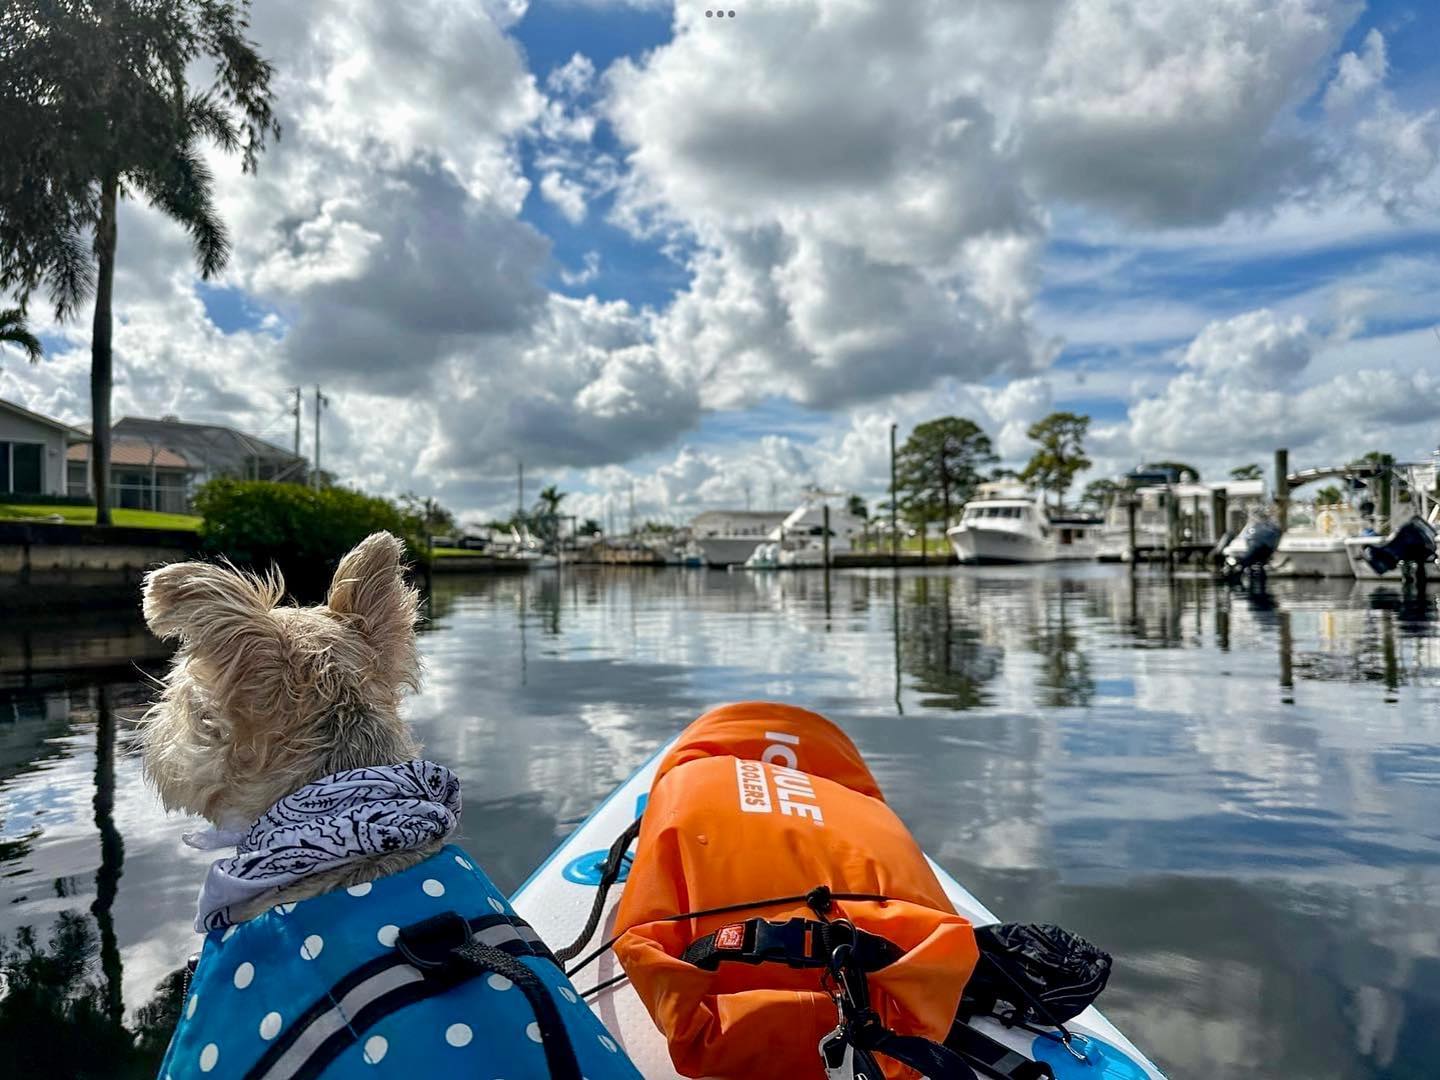 Small yorkie on the bow of a Bixpy motored kayak